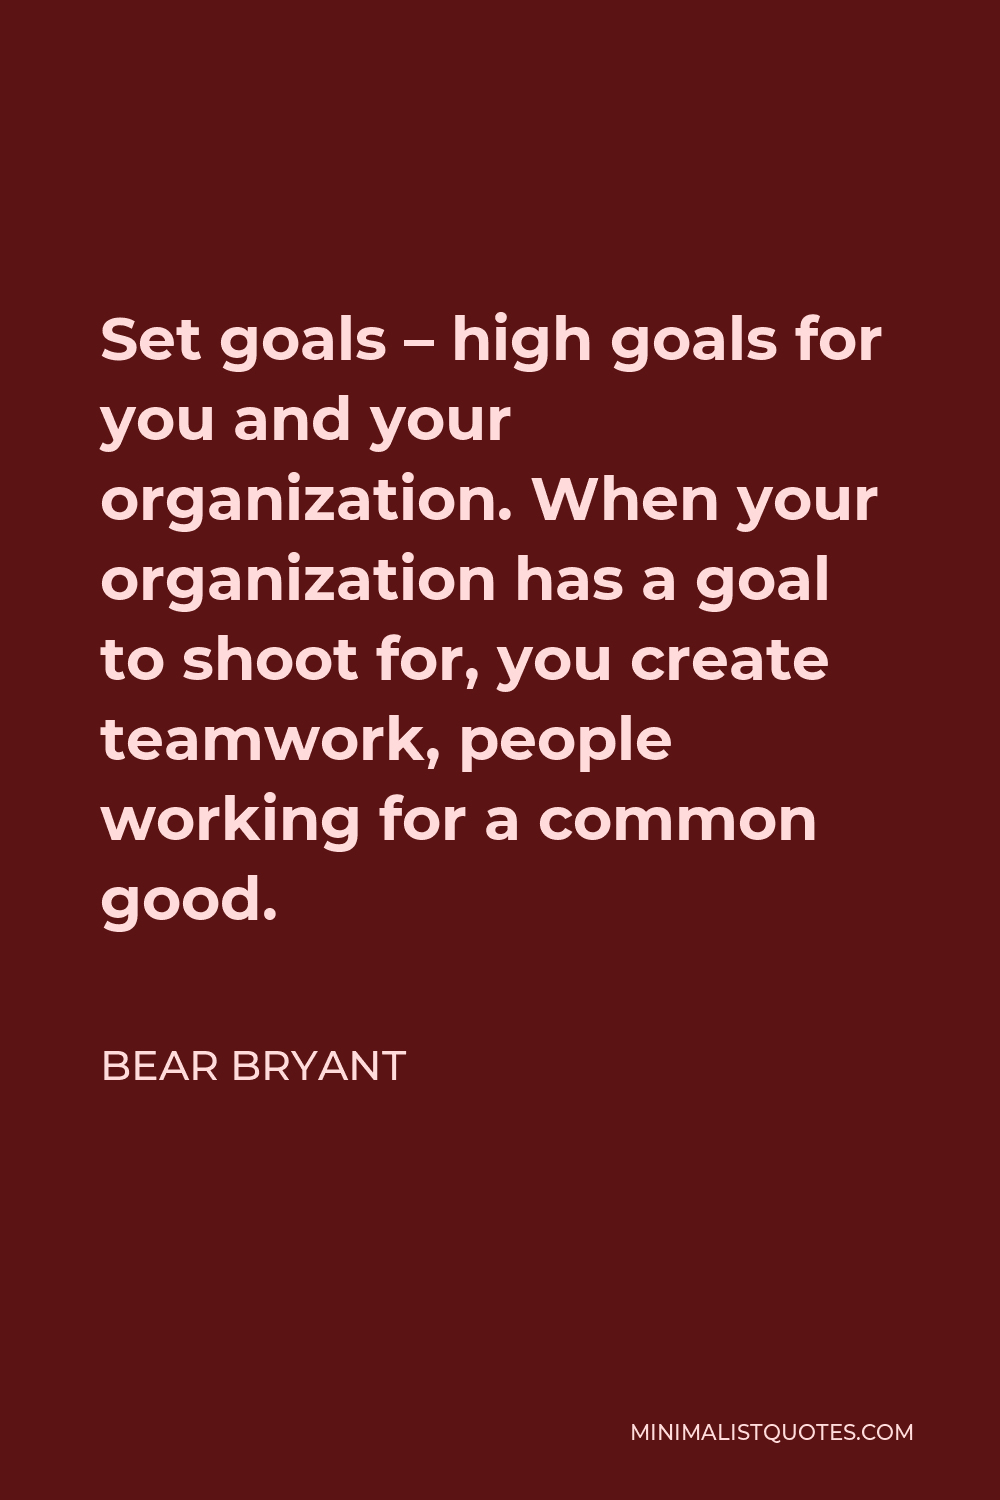 Bear Bryant Quote - Set goals – high goals for you and your organization. When your organization has a goal to shoot for, you create teamwork, people working for a common good.